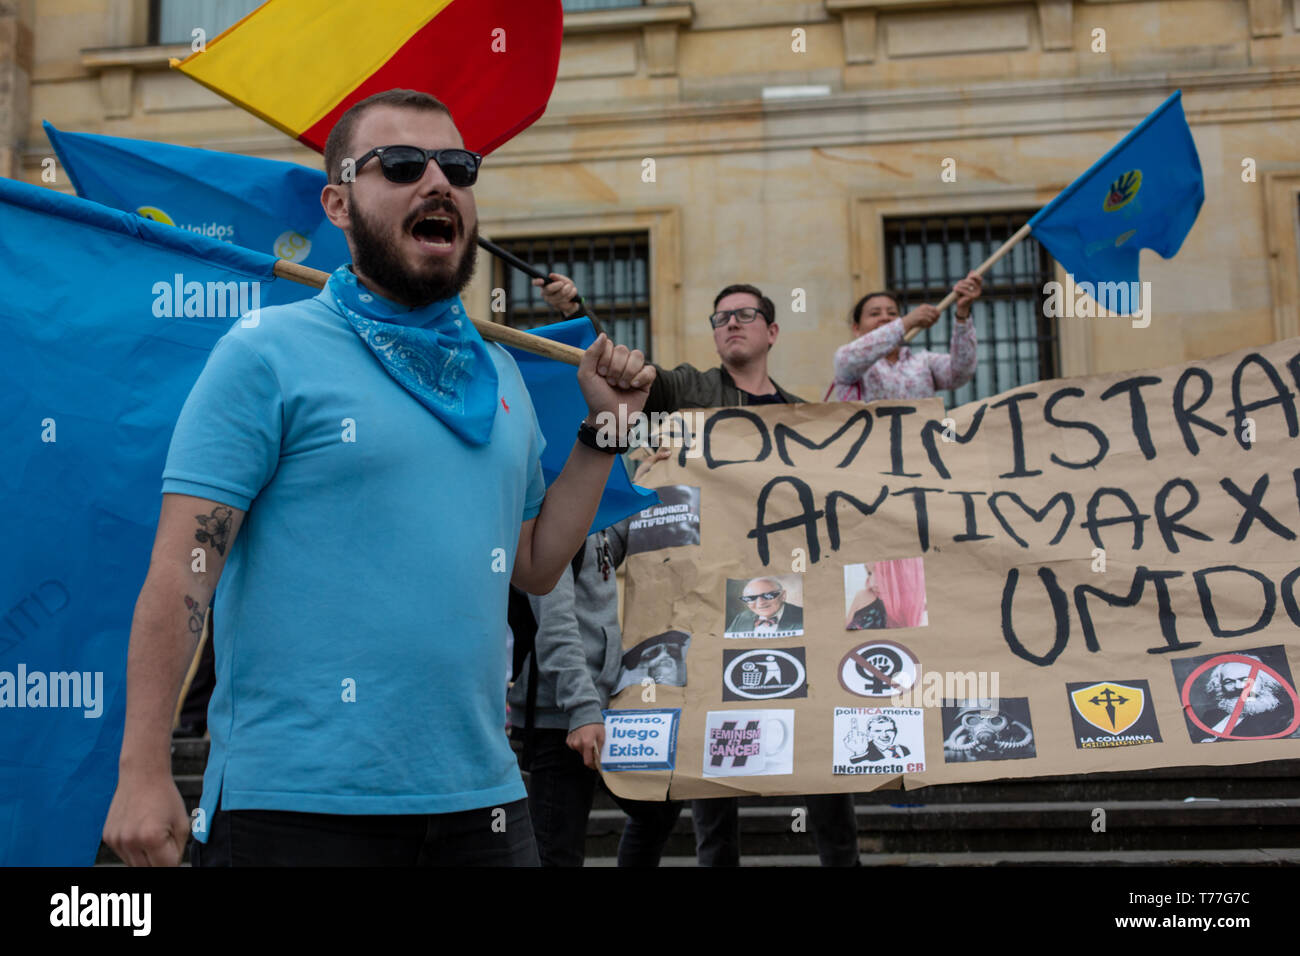 Bogota, Colombia. 04th May, 2019. Demonstrators holding a sign and chanting patriotic slogans during the 'Unidos por la vida' (United for Life) Pro life rally in Bogota.  Under the slogan 'I choose the two lives' around 500 people demonstrated for the maintenance of traditional family values, against abortion and the killing of social leaders in the country. Catholic and right wing political groups joined the call of the 'United for Life' Platform (Unidos por la Vida) a widely spread organization in Colombia. Credit: SOPA Images Limited/Alamy Live News Stock Photo